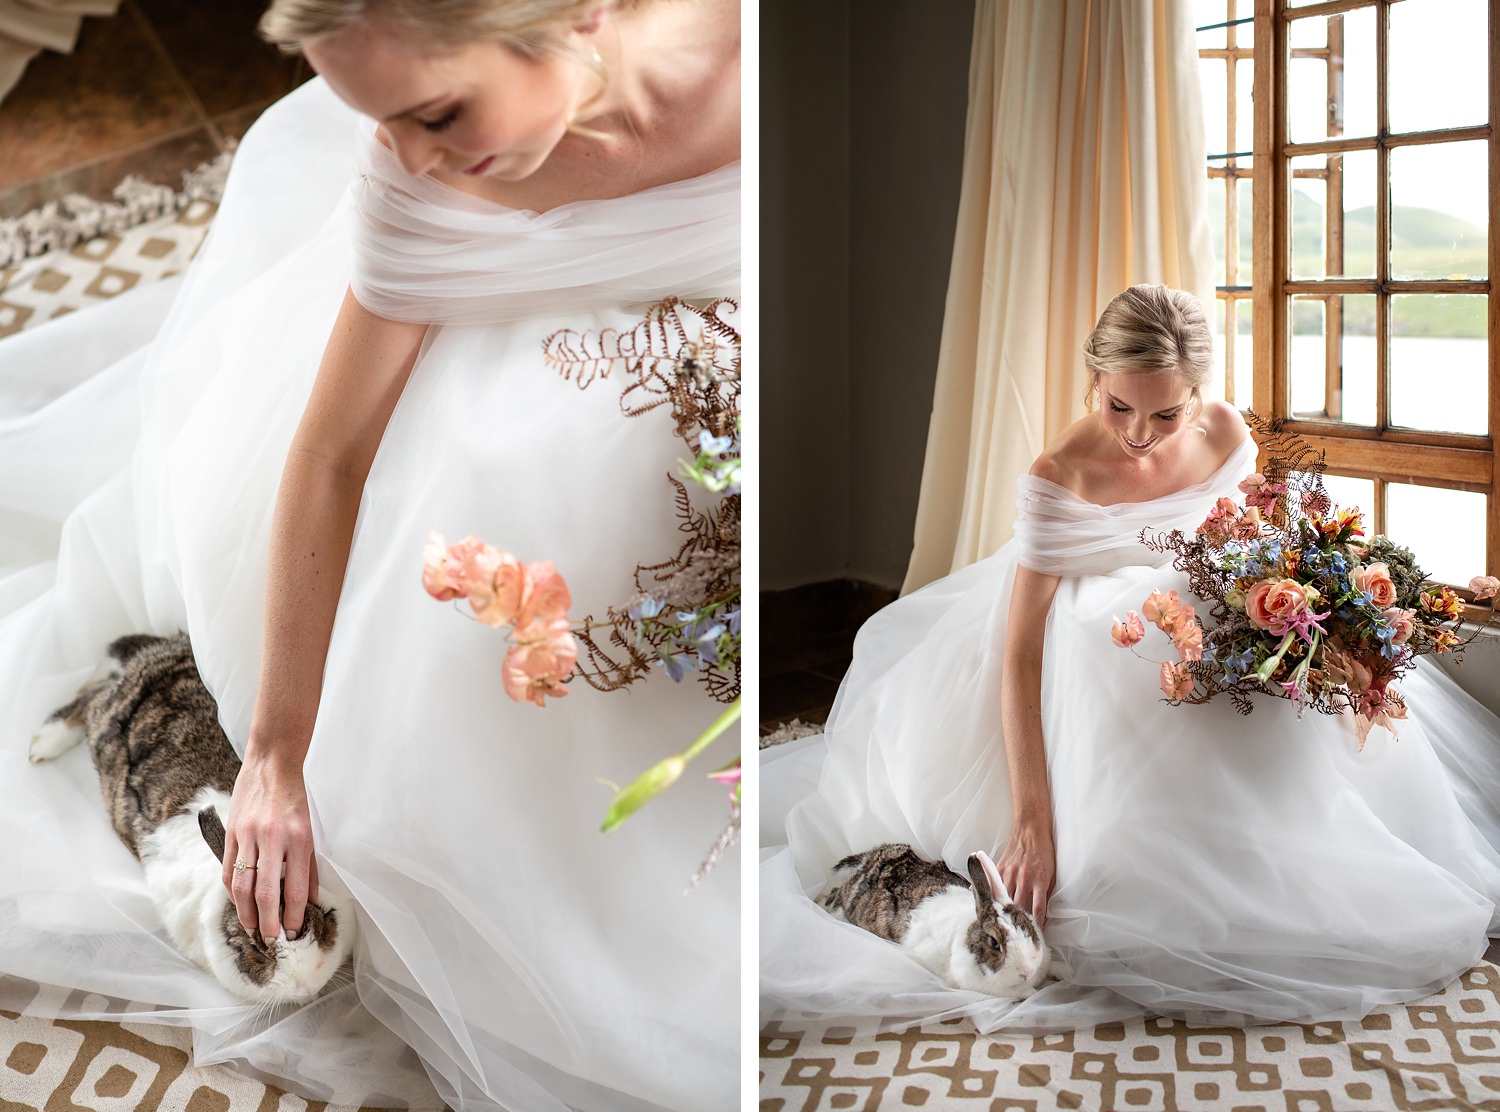 A bride leans down to pat her bunny rabbit on her wedding day.